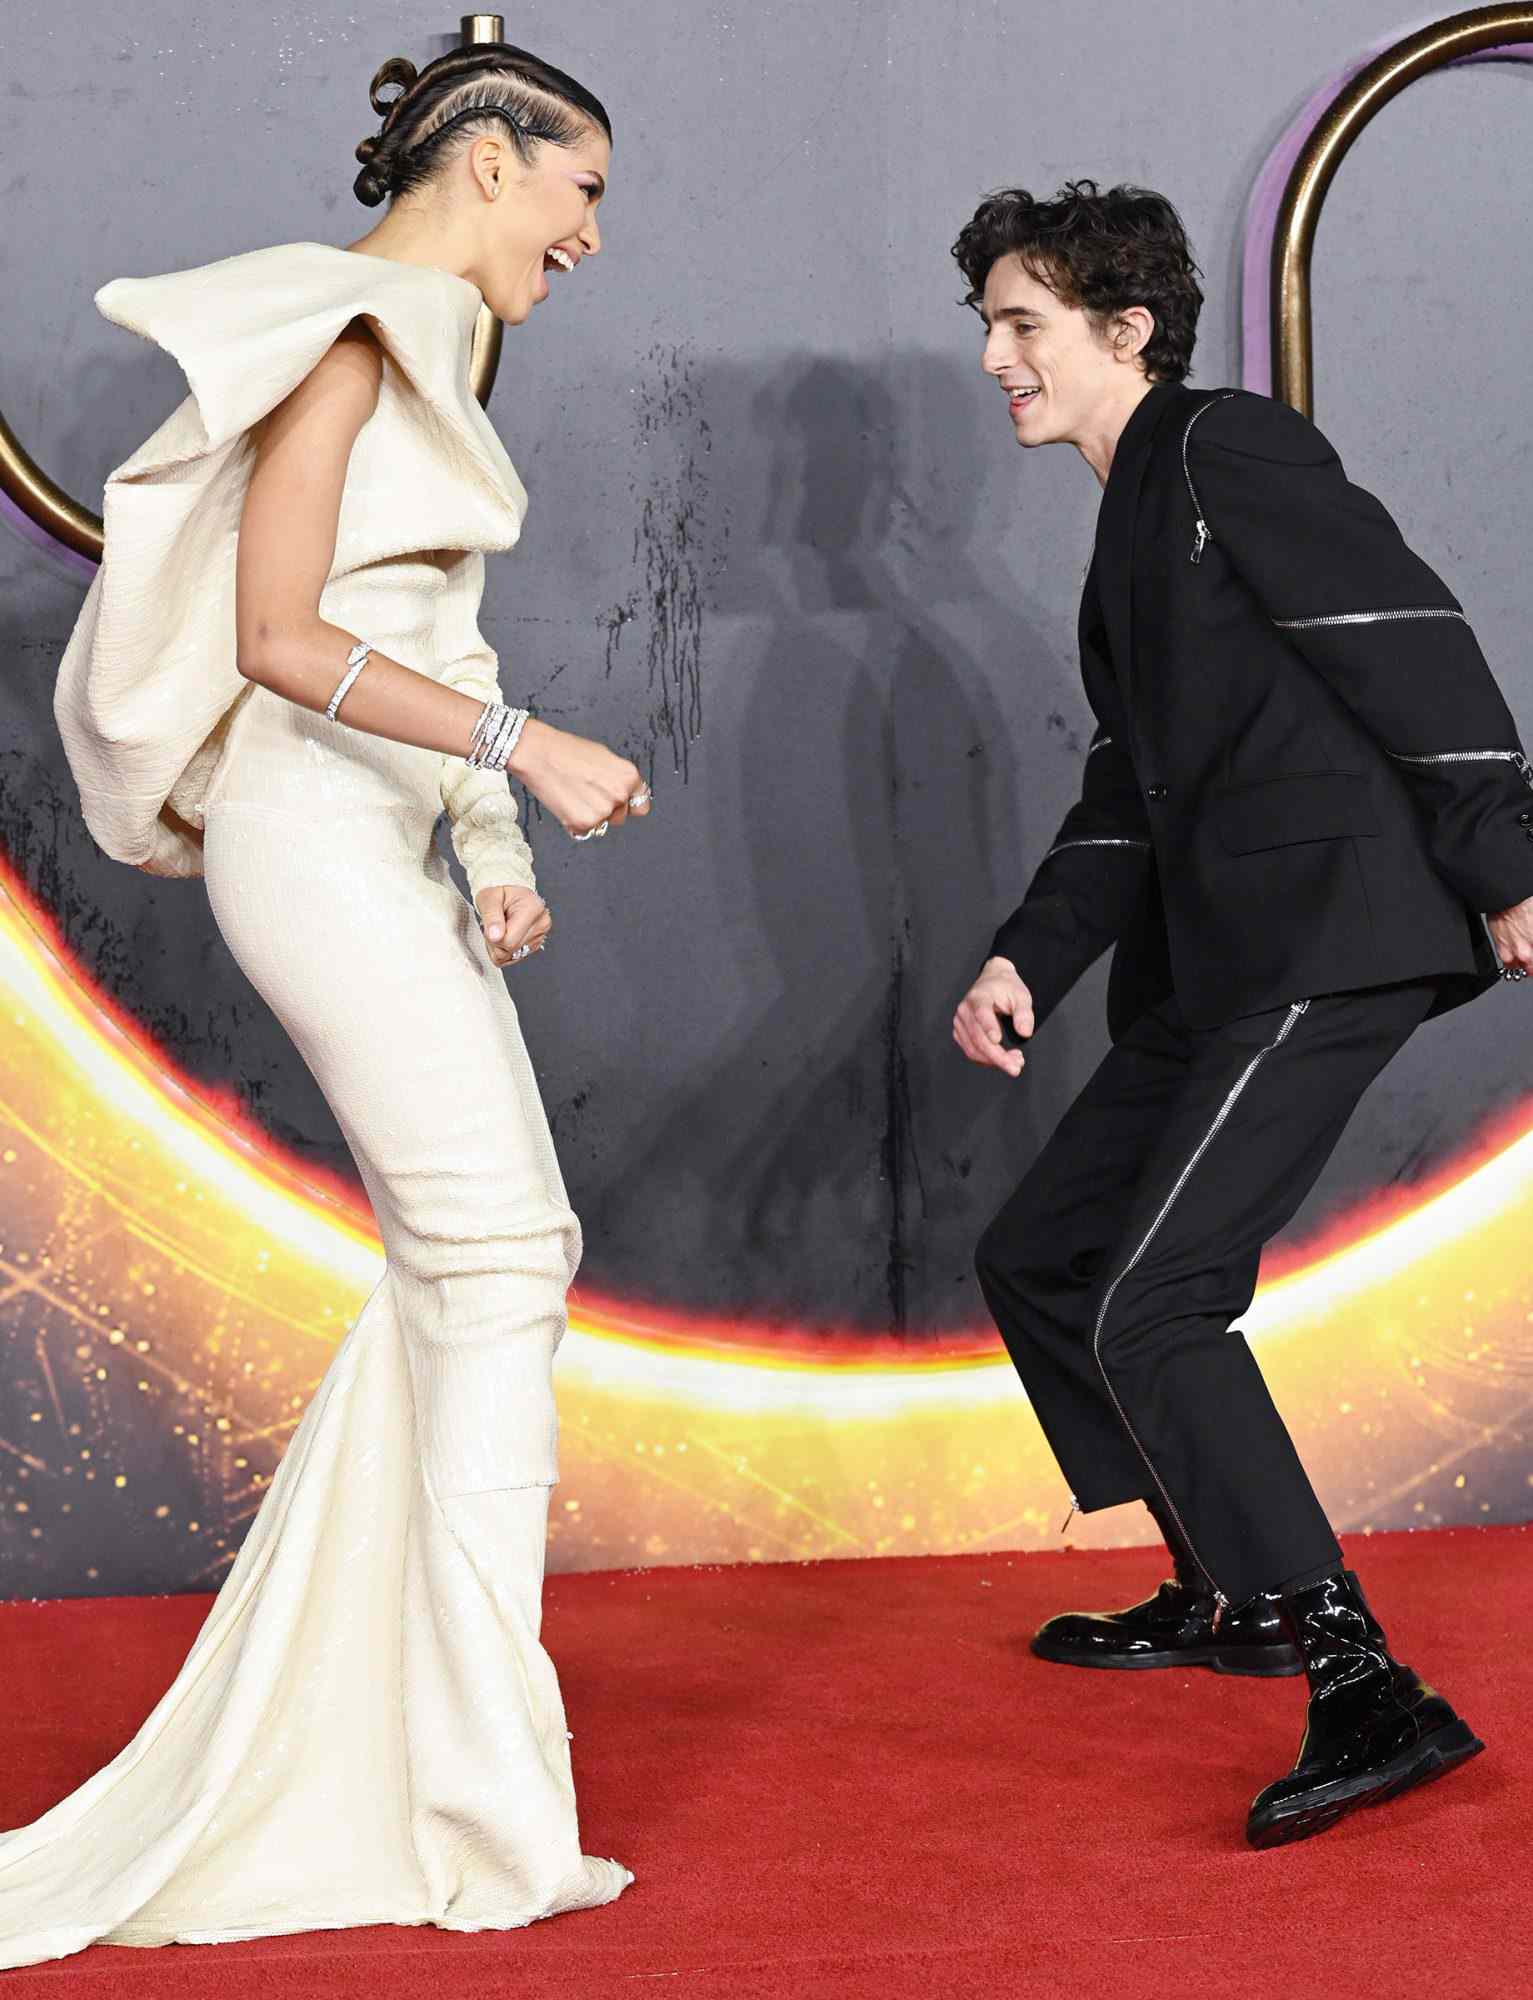 Zendaya and TimothÃ©e Chalamet attend the "Dune" UK Special Screening at Odeon Luxe Leicester Square on October 18, 2021 in London, England.